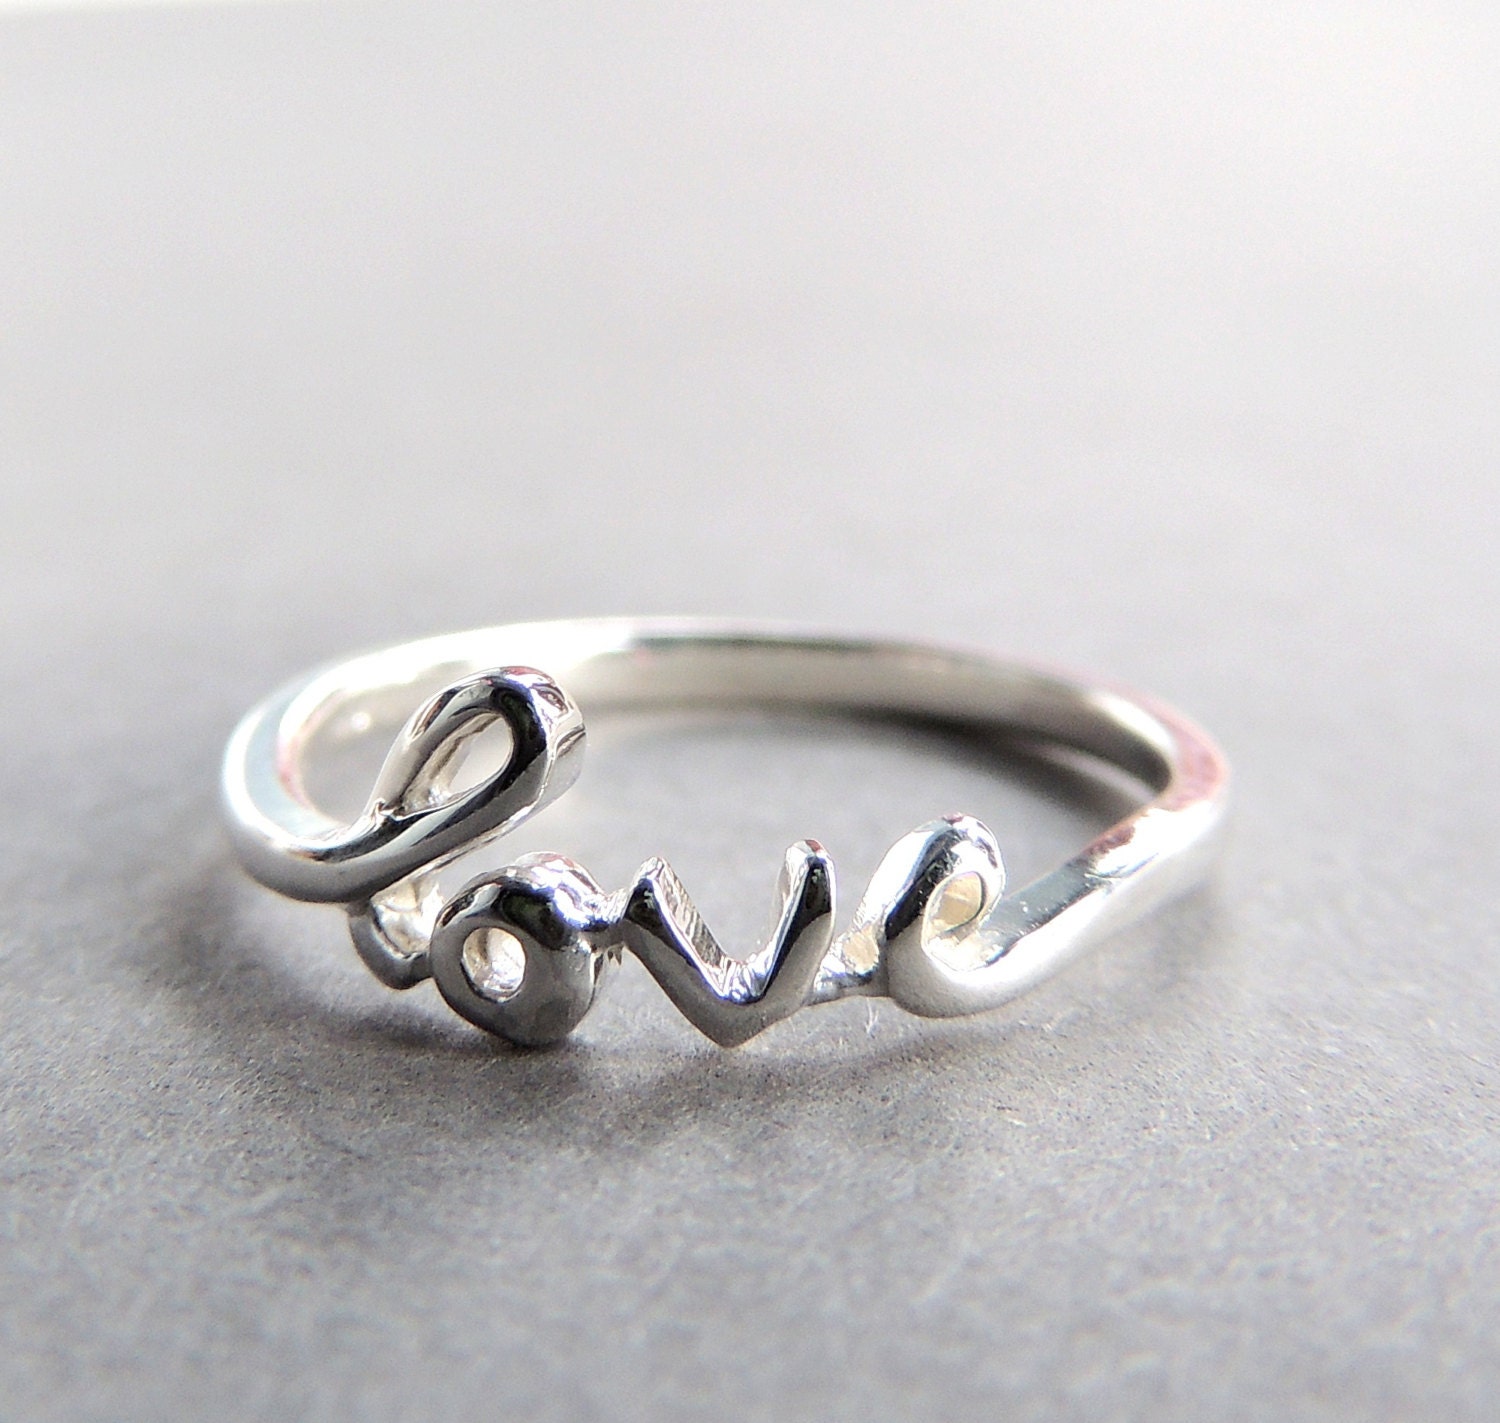 Silver Love Ring, Silver Jewelry, Silver Rings, Love Ring, Love ...